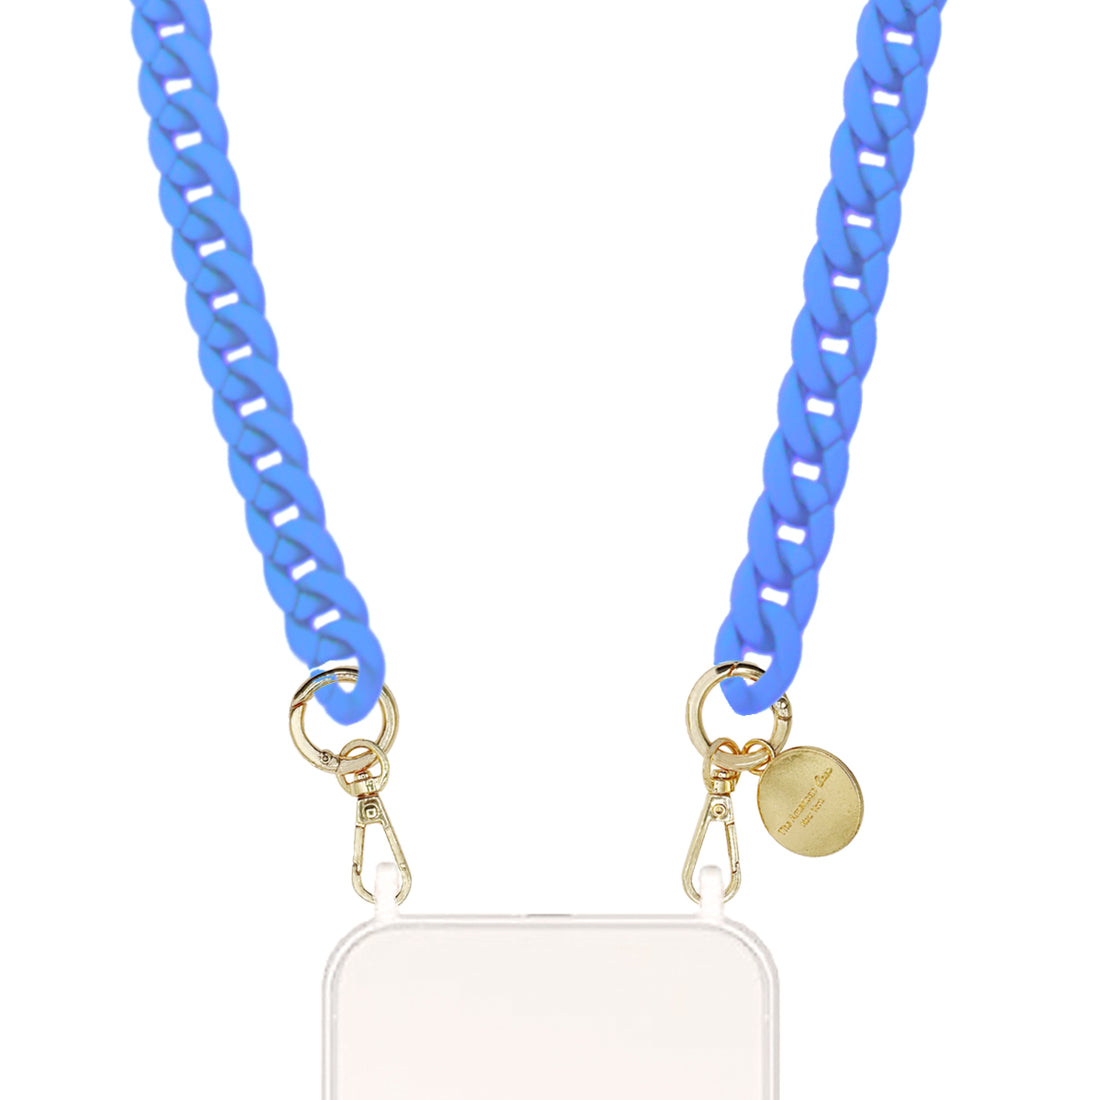 Madison - Crossbody Matte Resin Phone Chain with Golden Carabiners